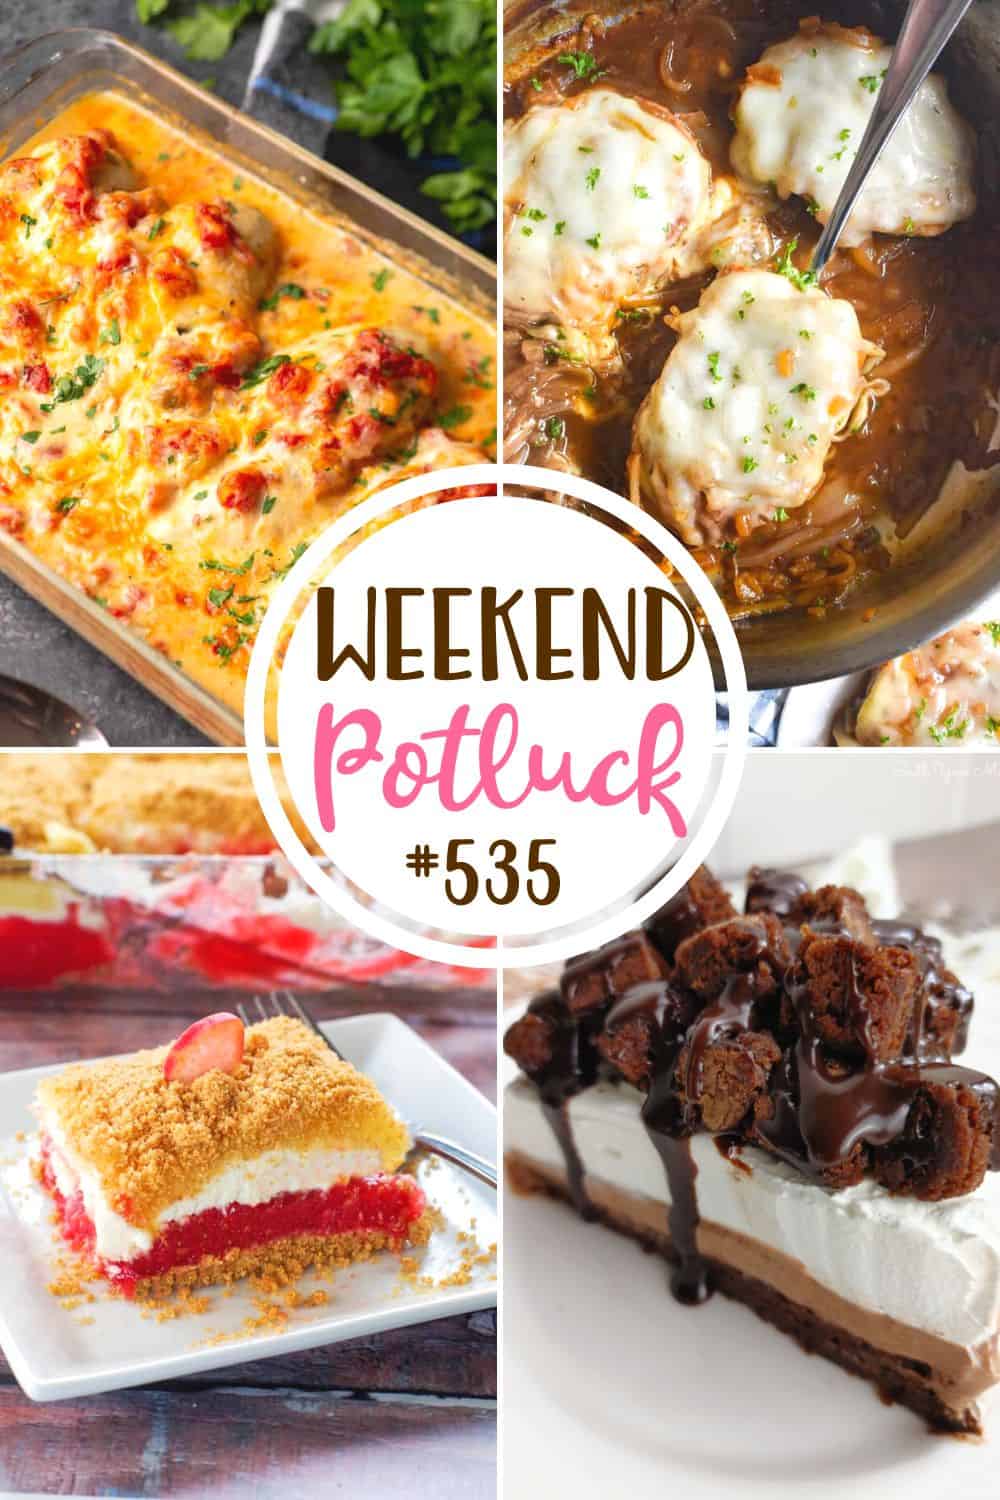 Weekend Potluck featured recipes include: Queso Chicken, Rhubarb Dessert, French Onion Pork Chops, Triple Chocolate Brownie Cream Pie.